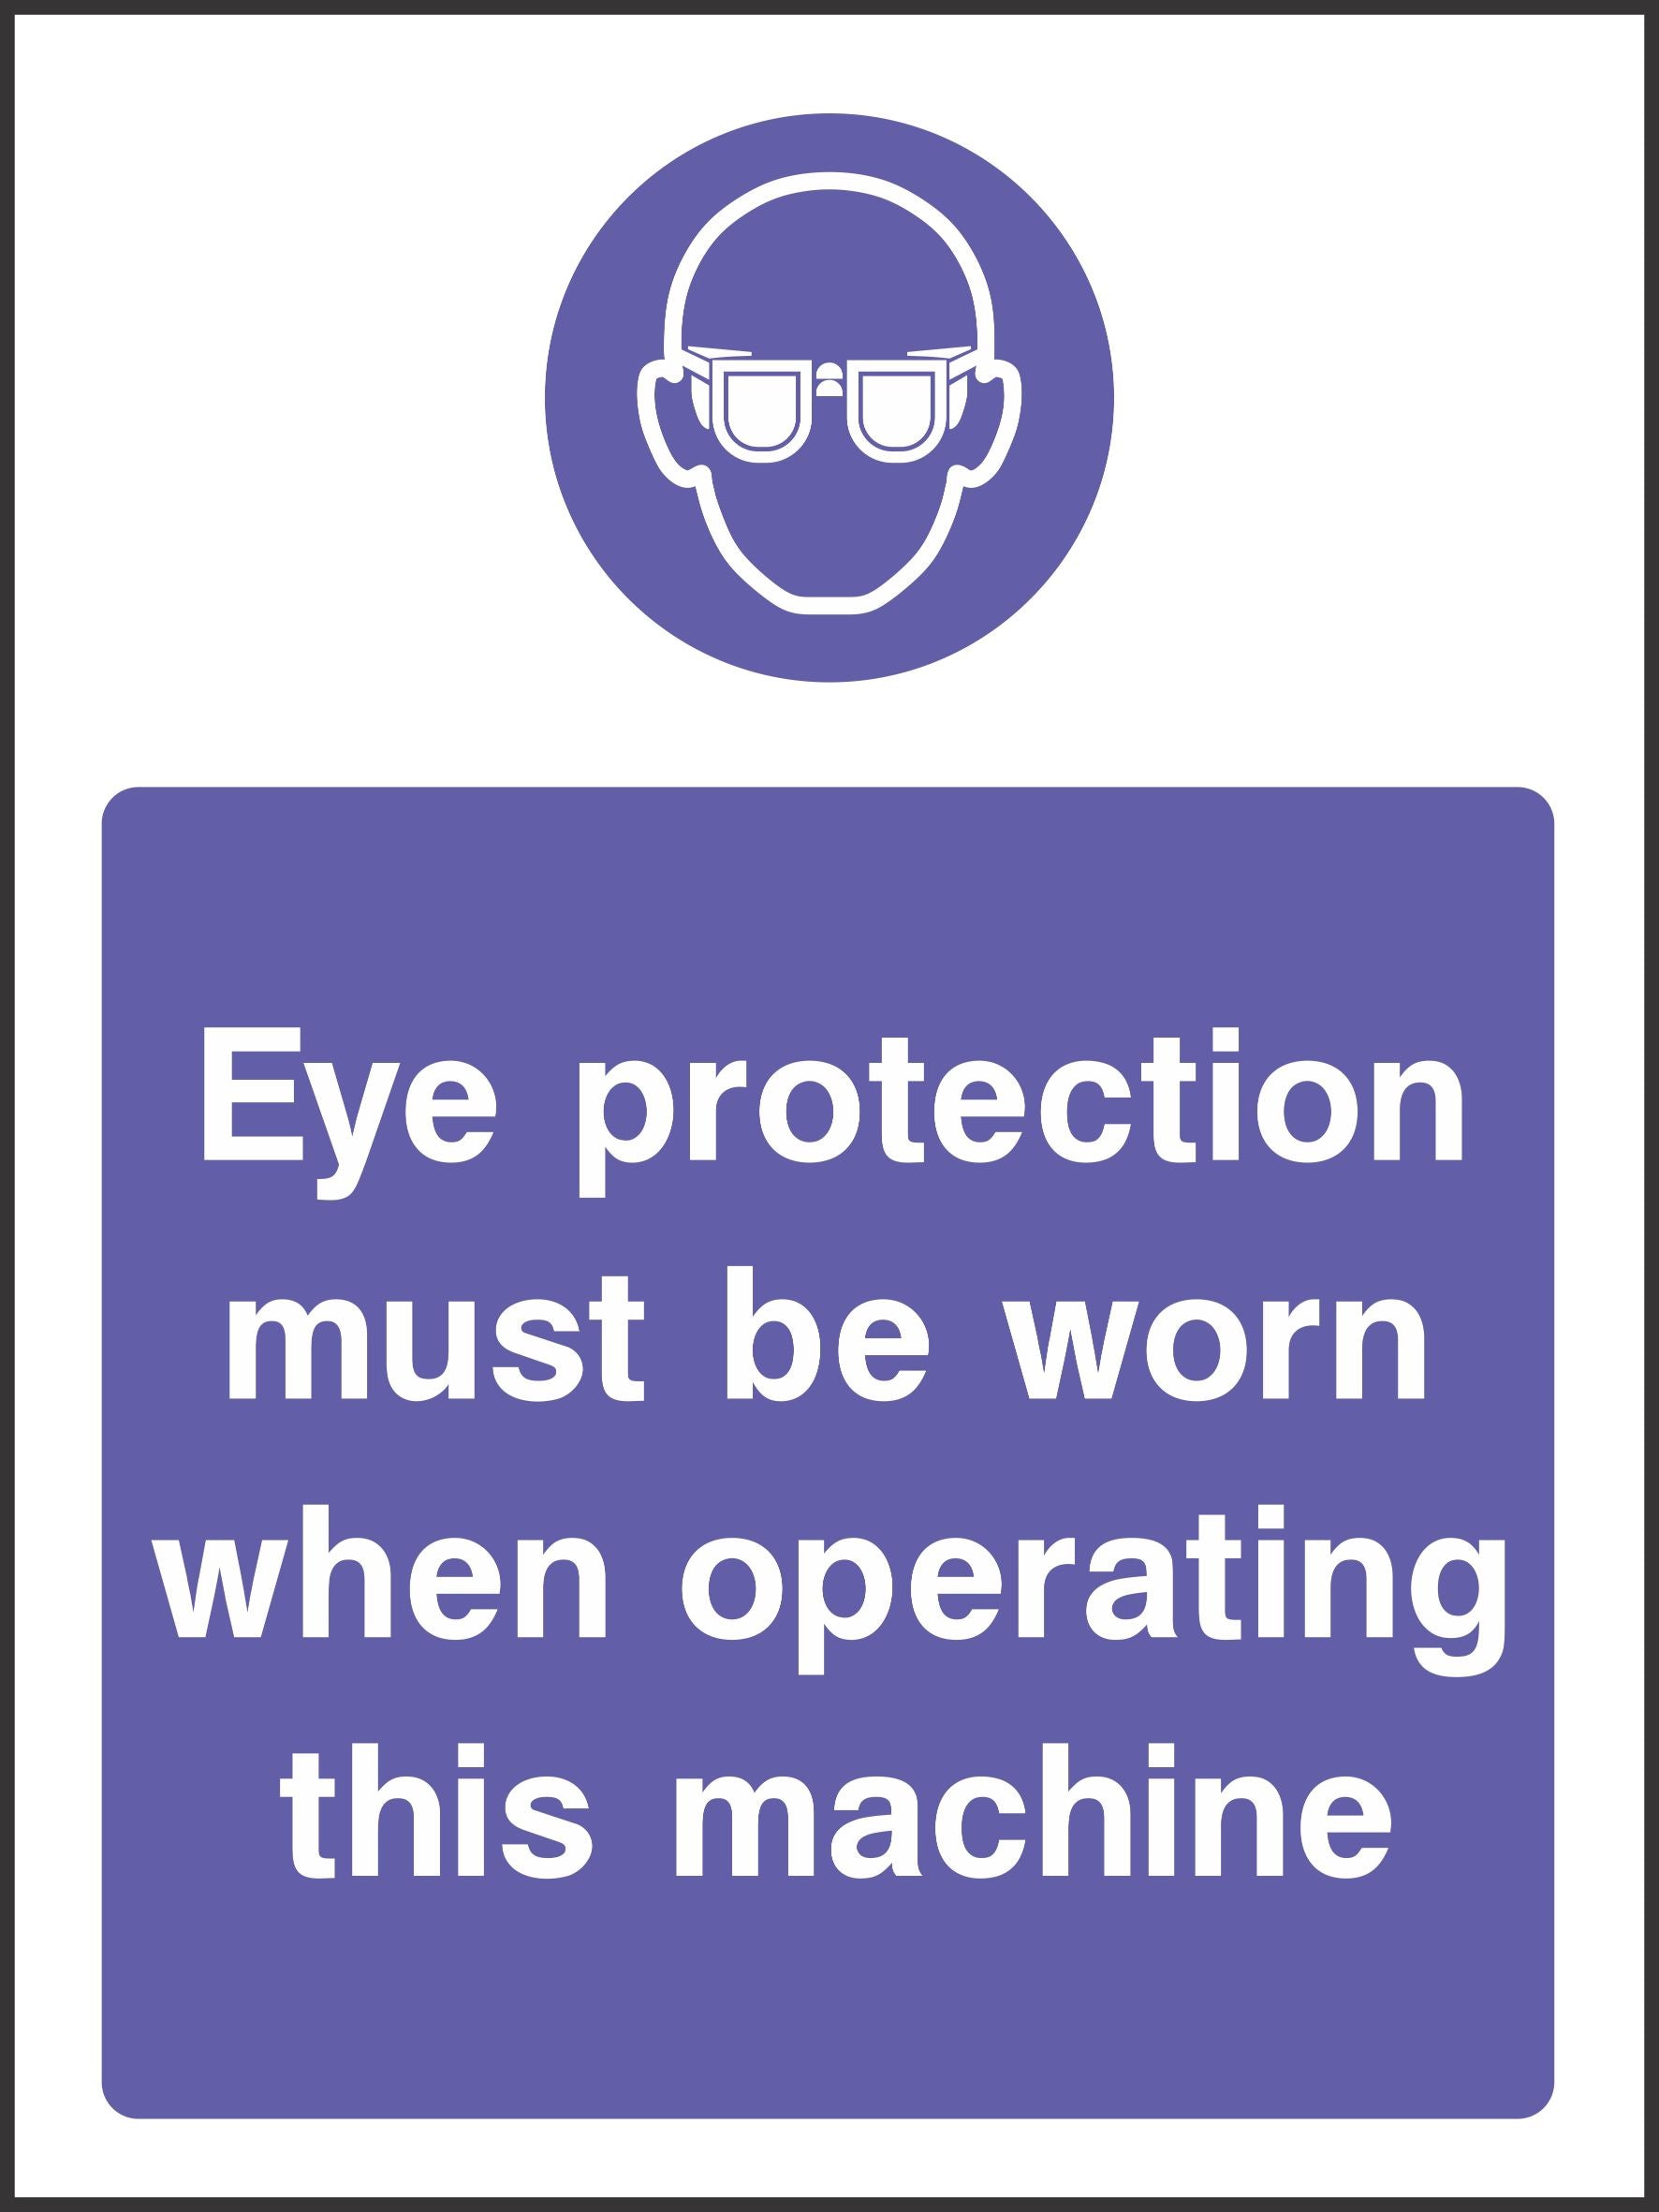 eye protection must be worn when operating this machine sign